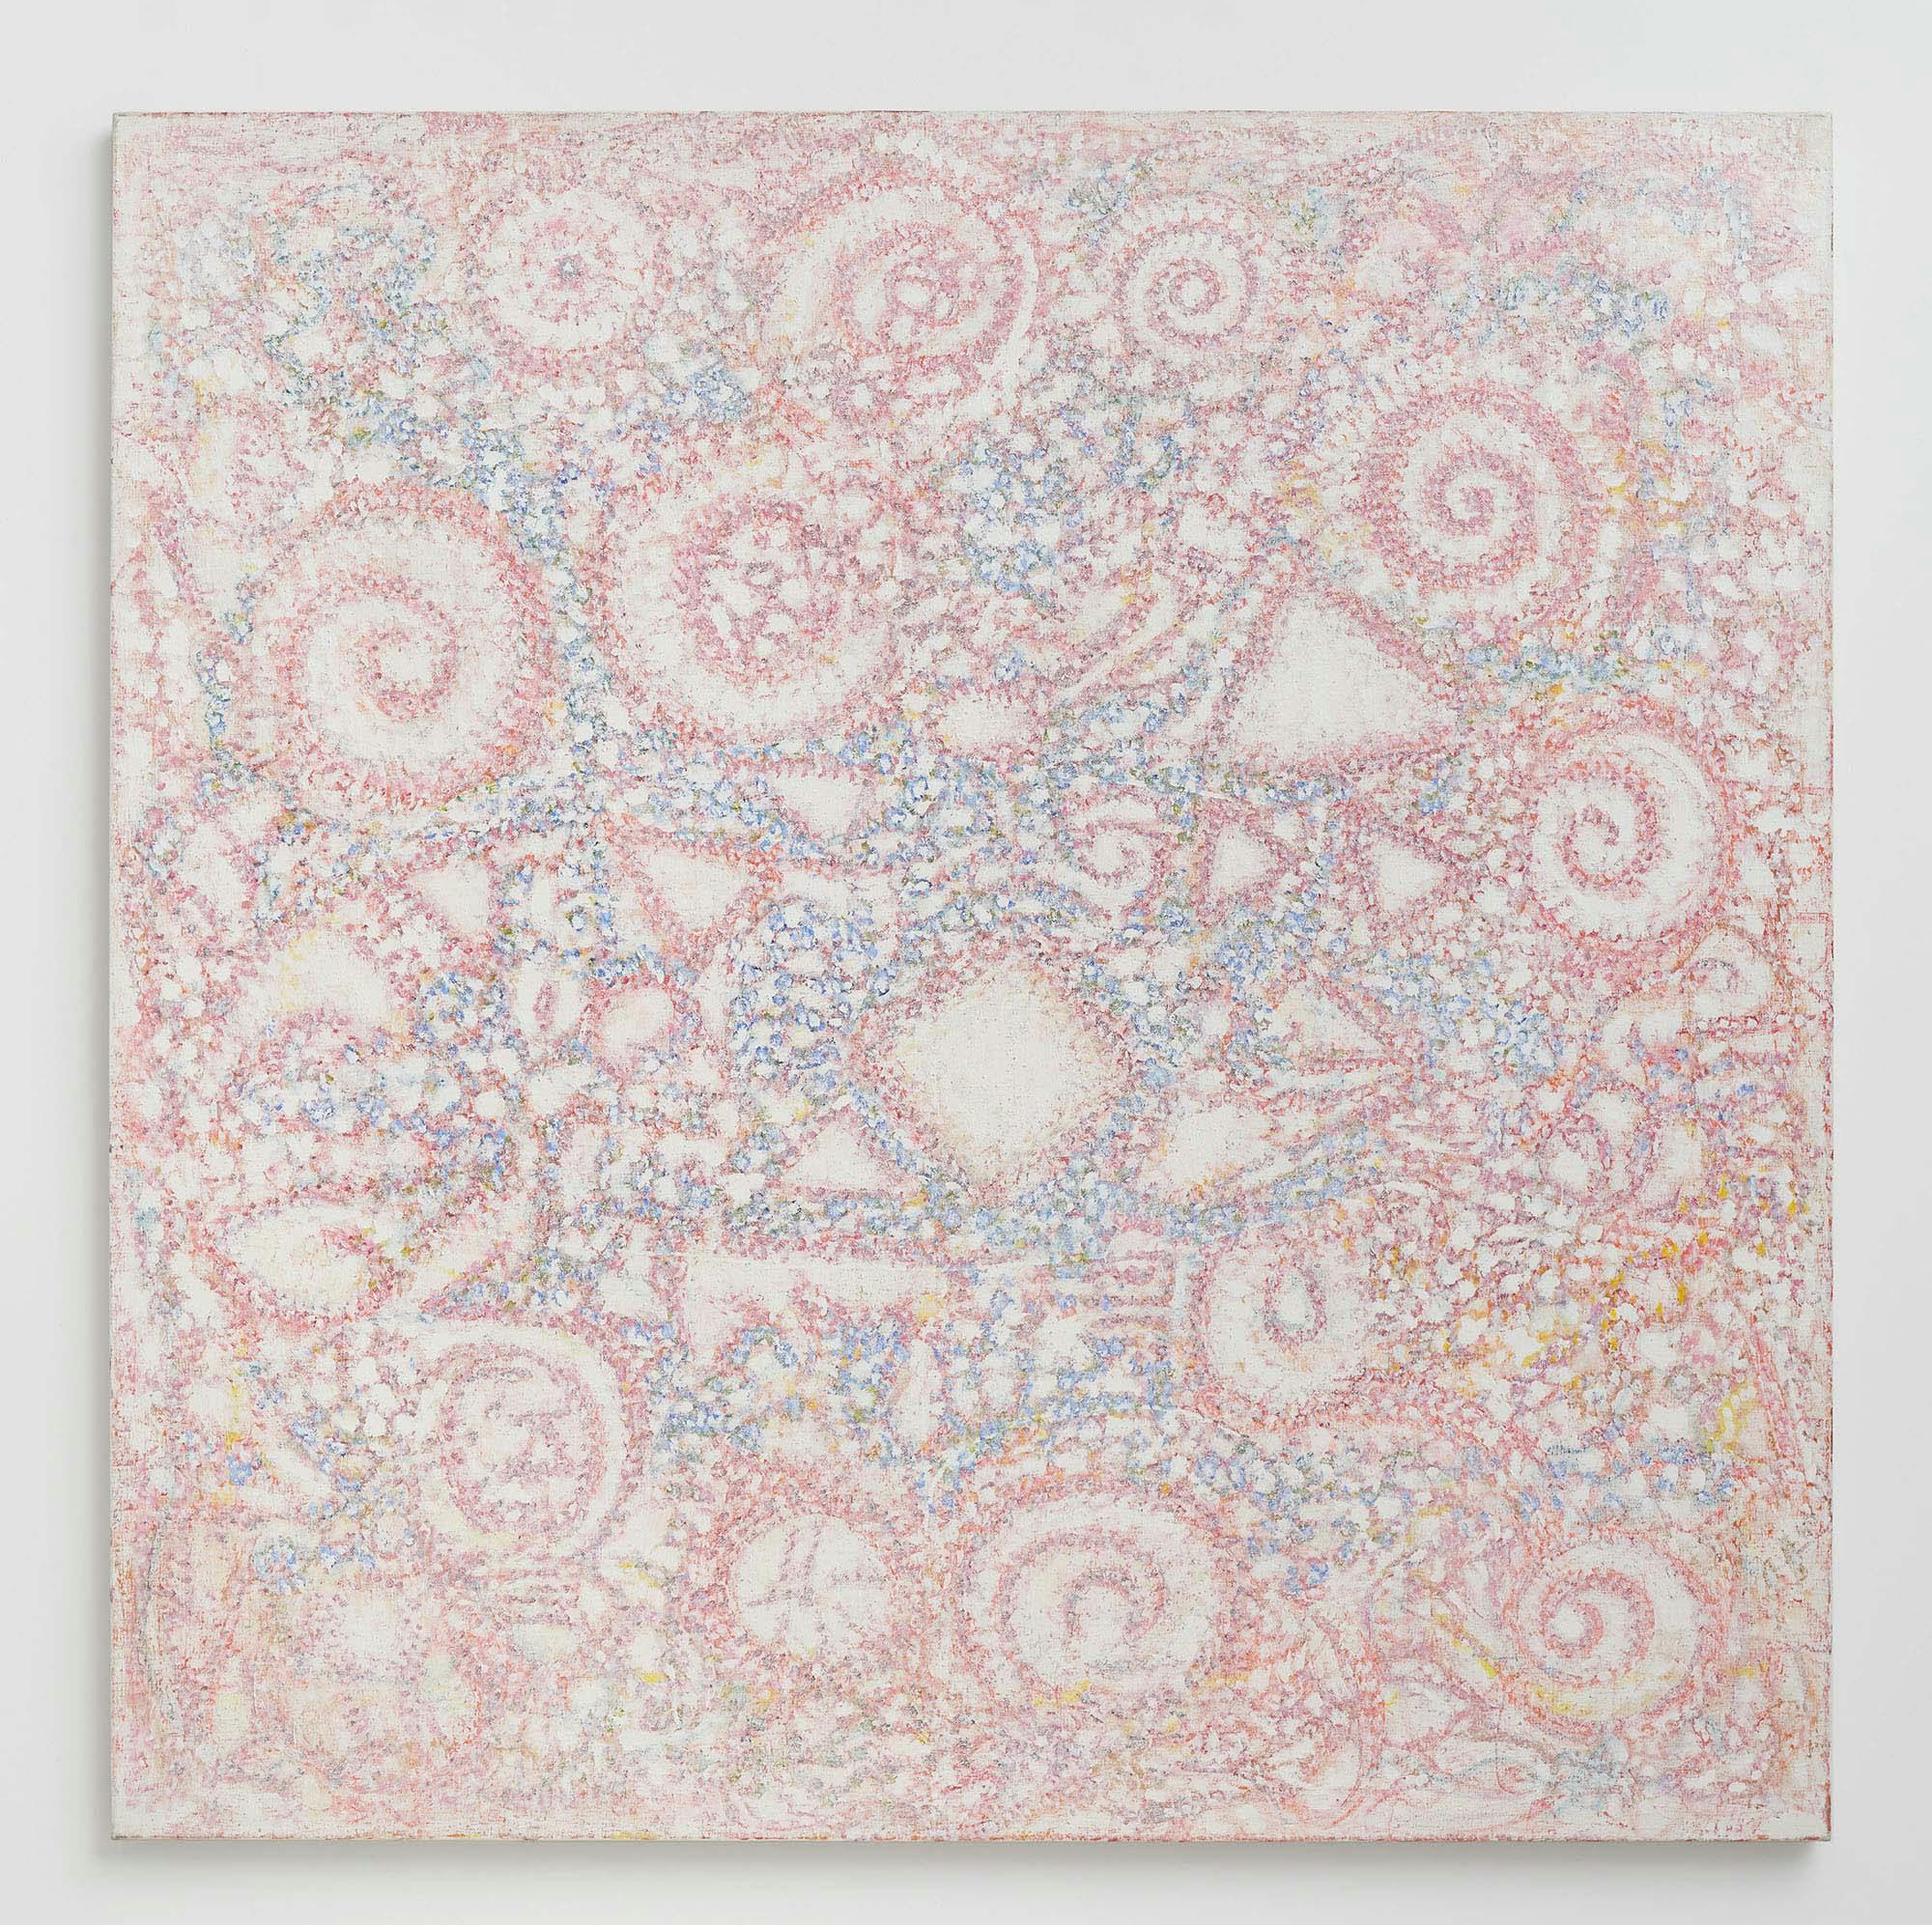 Space Continuum, Part II
1989
Oil on linen
72 x 72 in. (182.9 x 182.9 cm)
 – The Richard Pousette-Dart Foundation